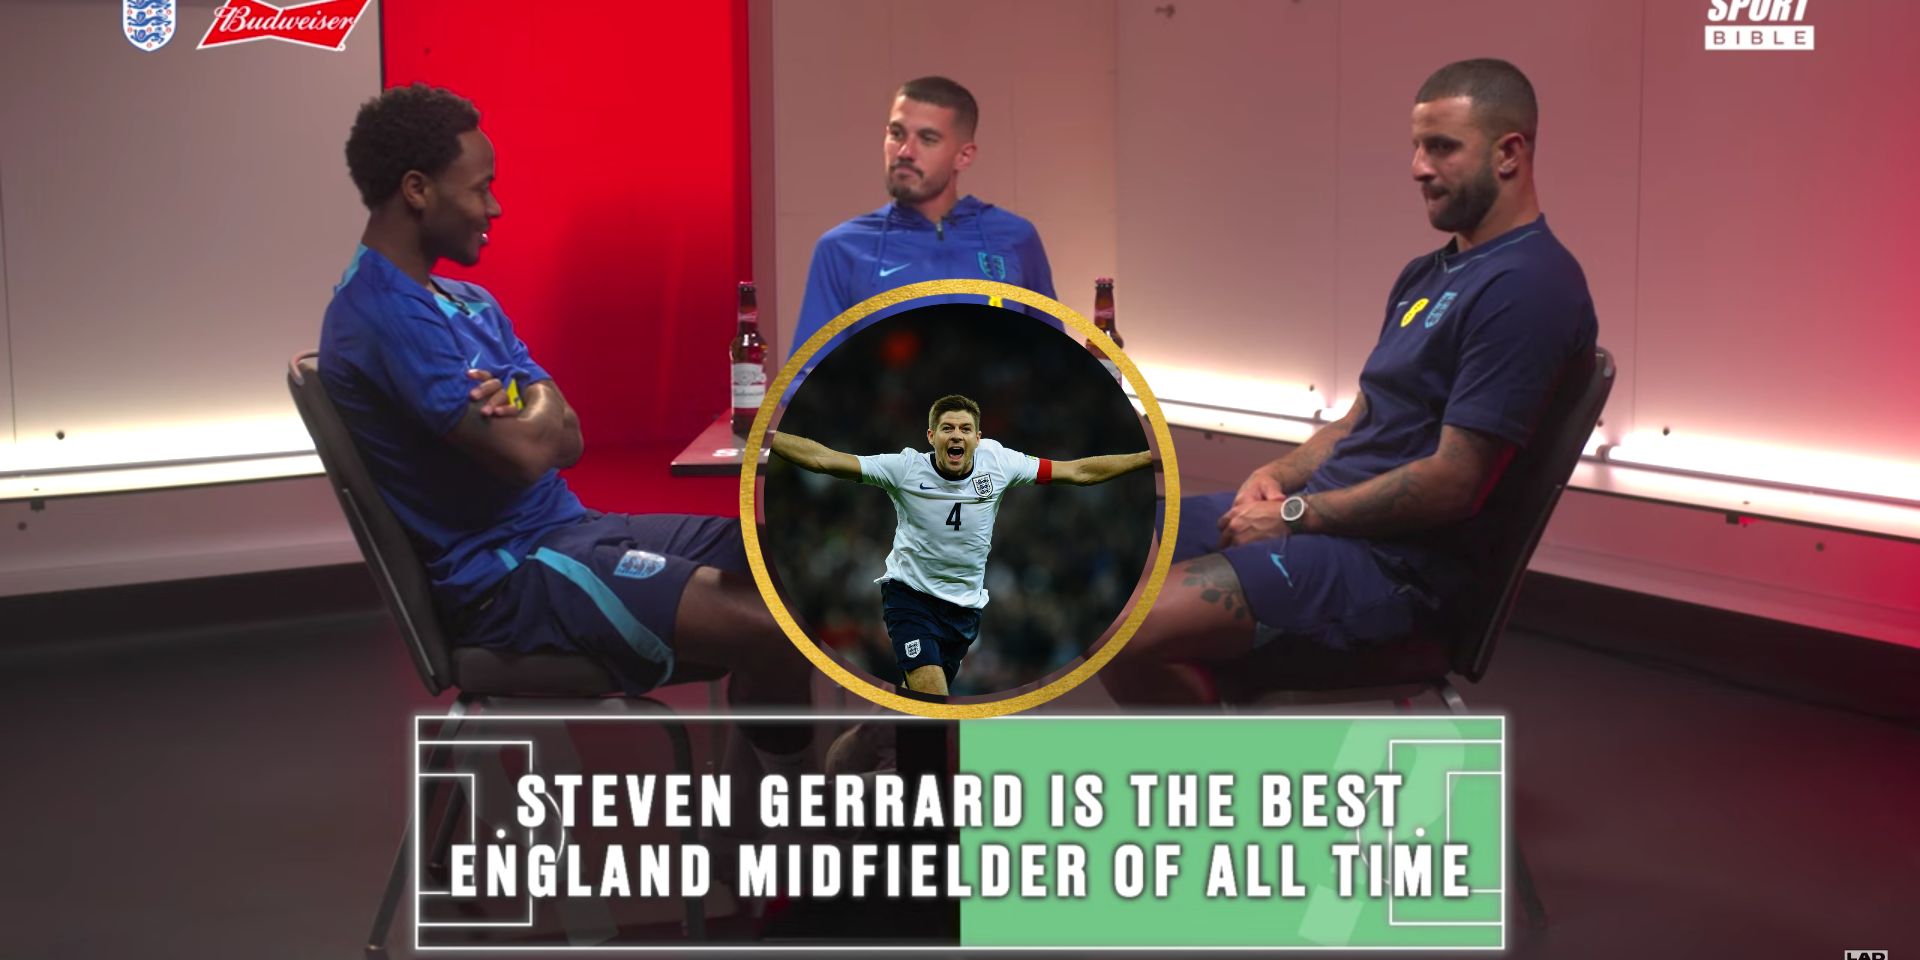 (Video) Sterling, Coady and Walker on Gerrard being the ‘best England midfielder of all time’